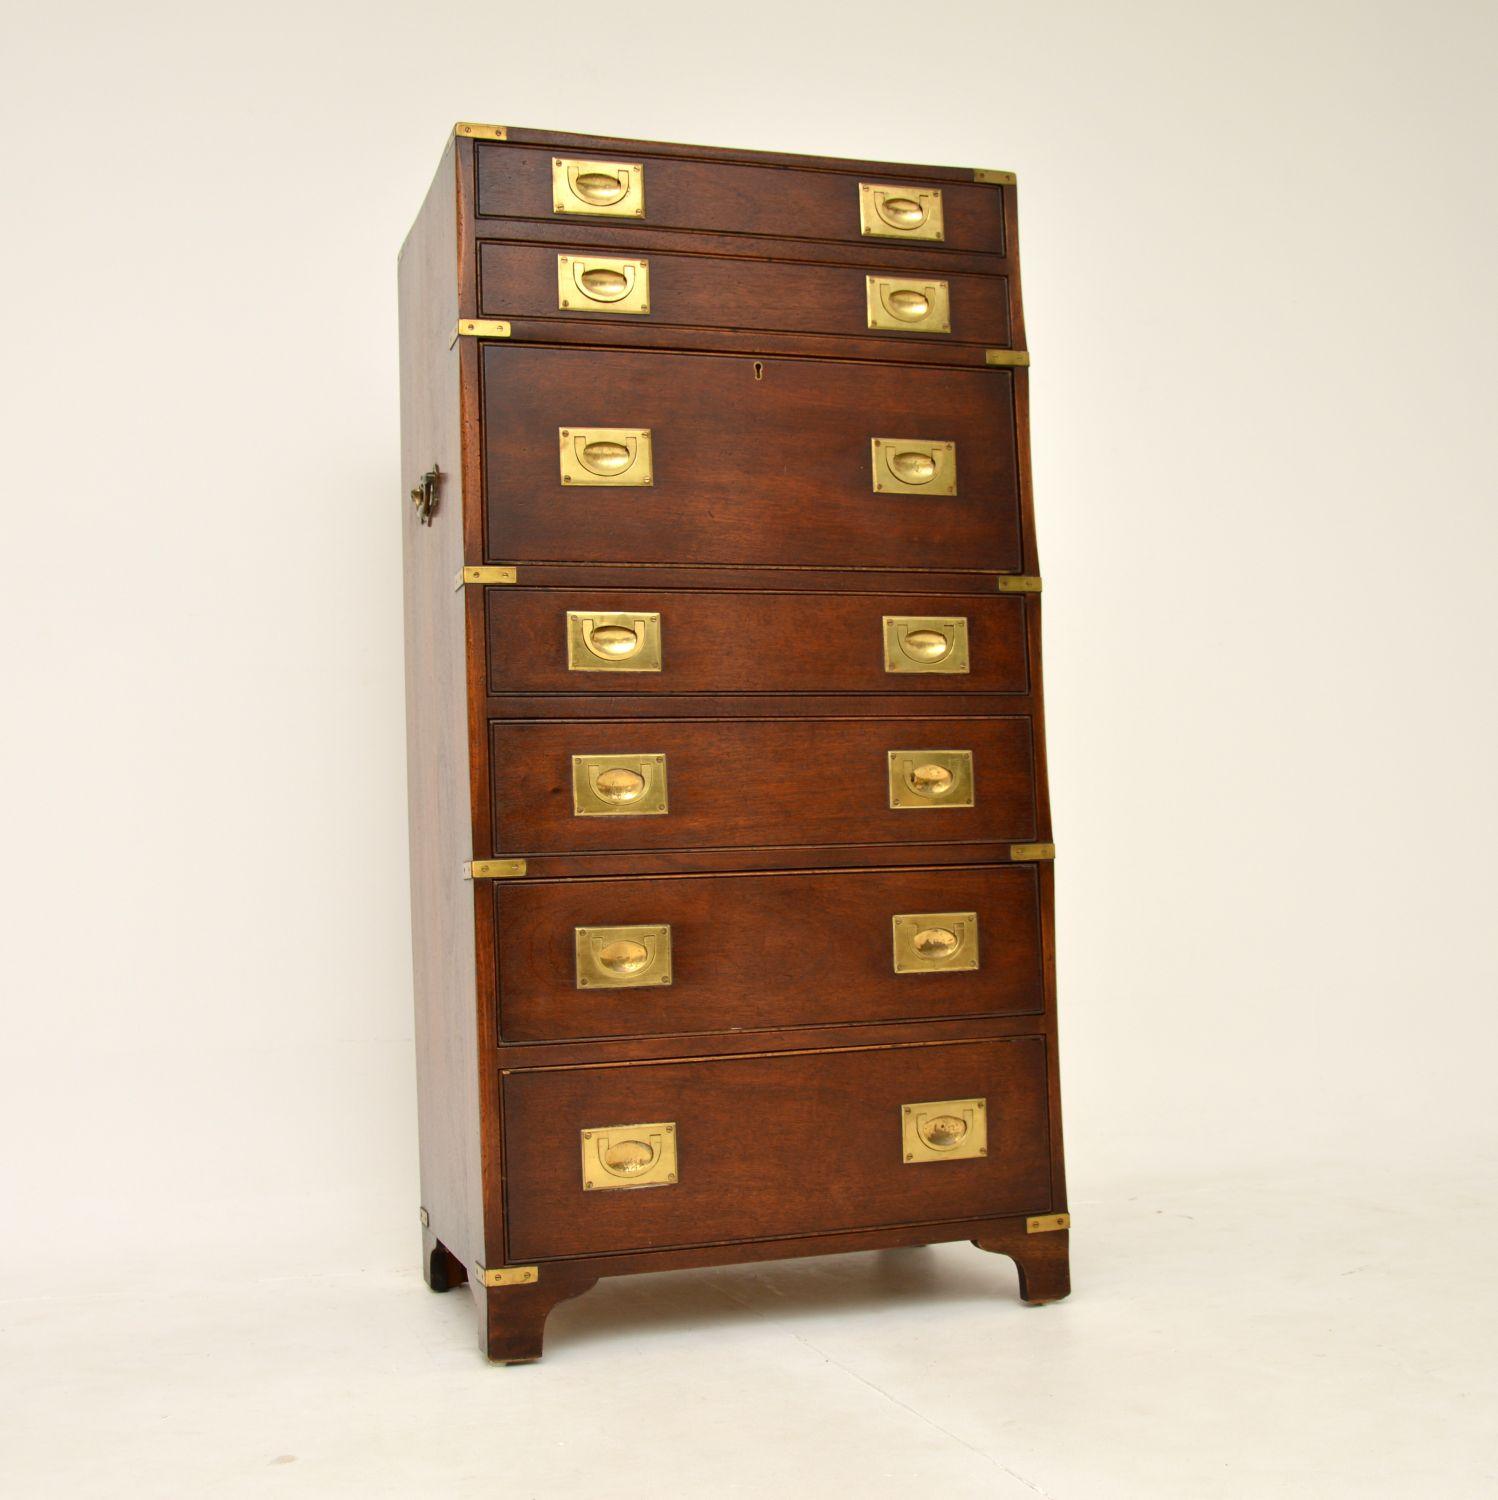 An incredible antique military campaign style chest of drawers, with a built in drop down bureau. This was made in England, it dates from around the 1930’s.

It is of exceptional quality and very compact. It’s not too wide or deep, with lots of